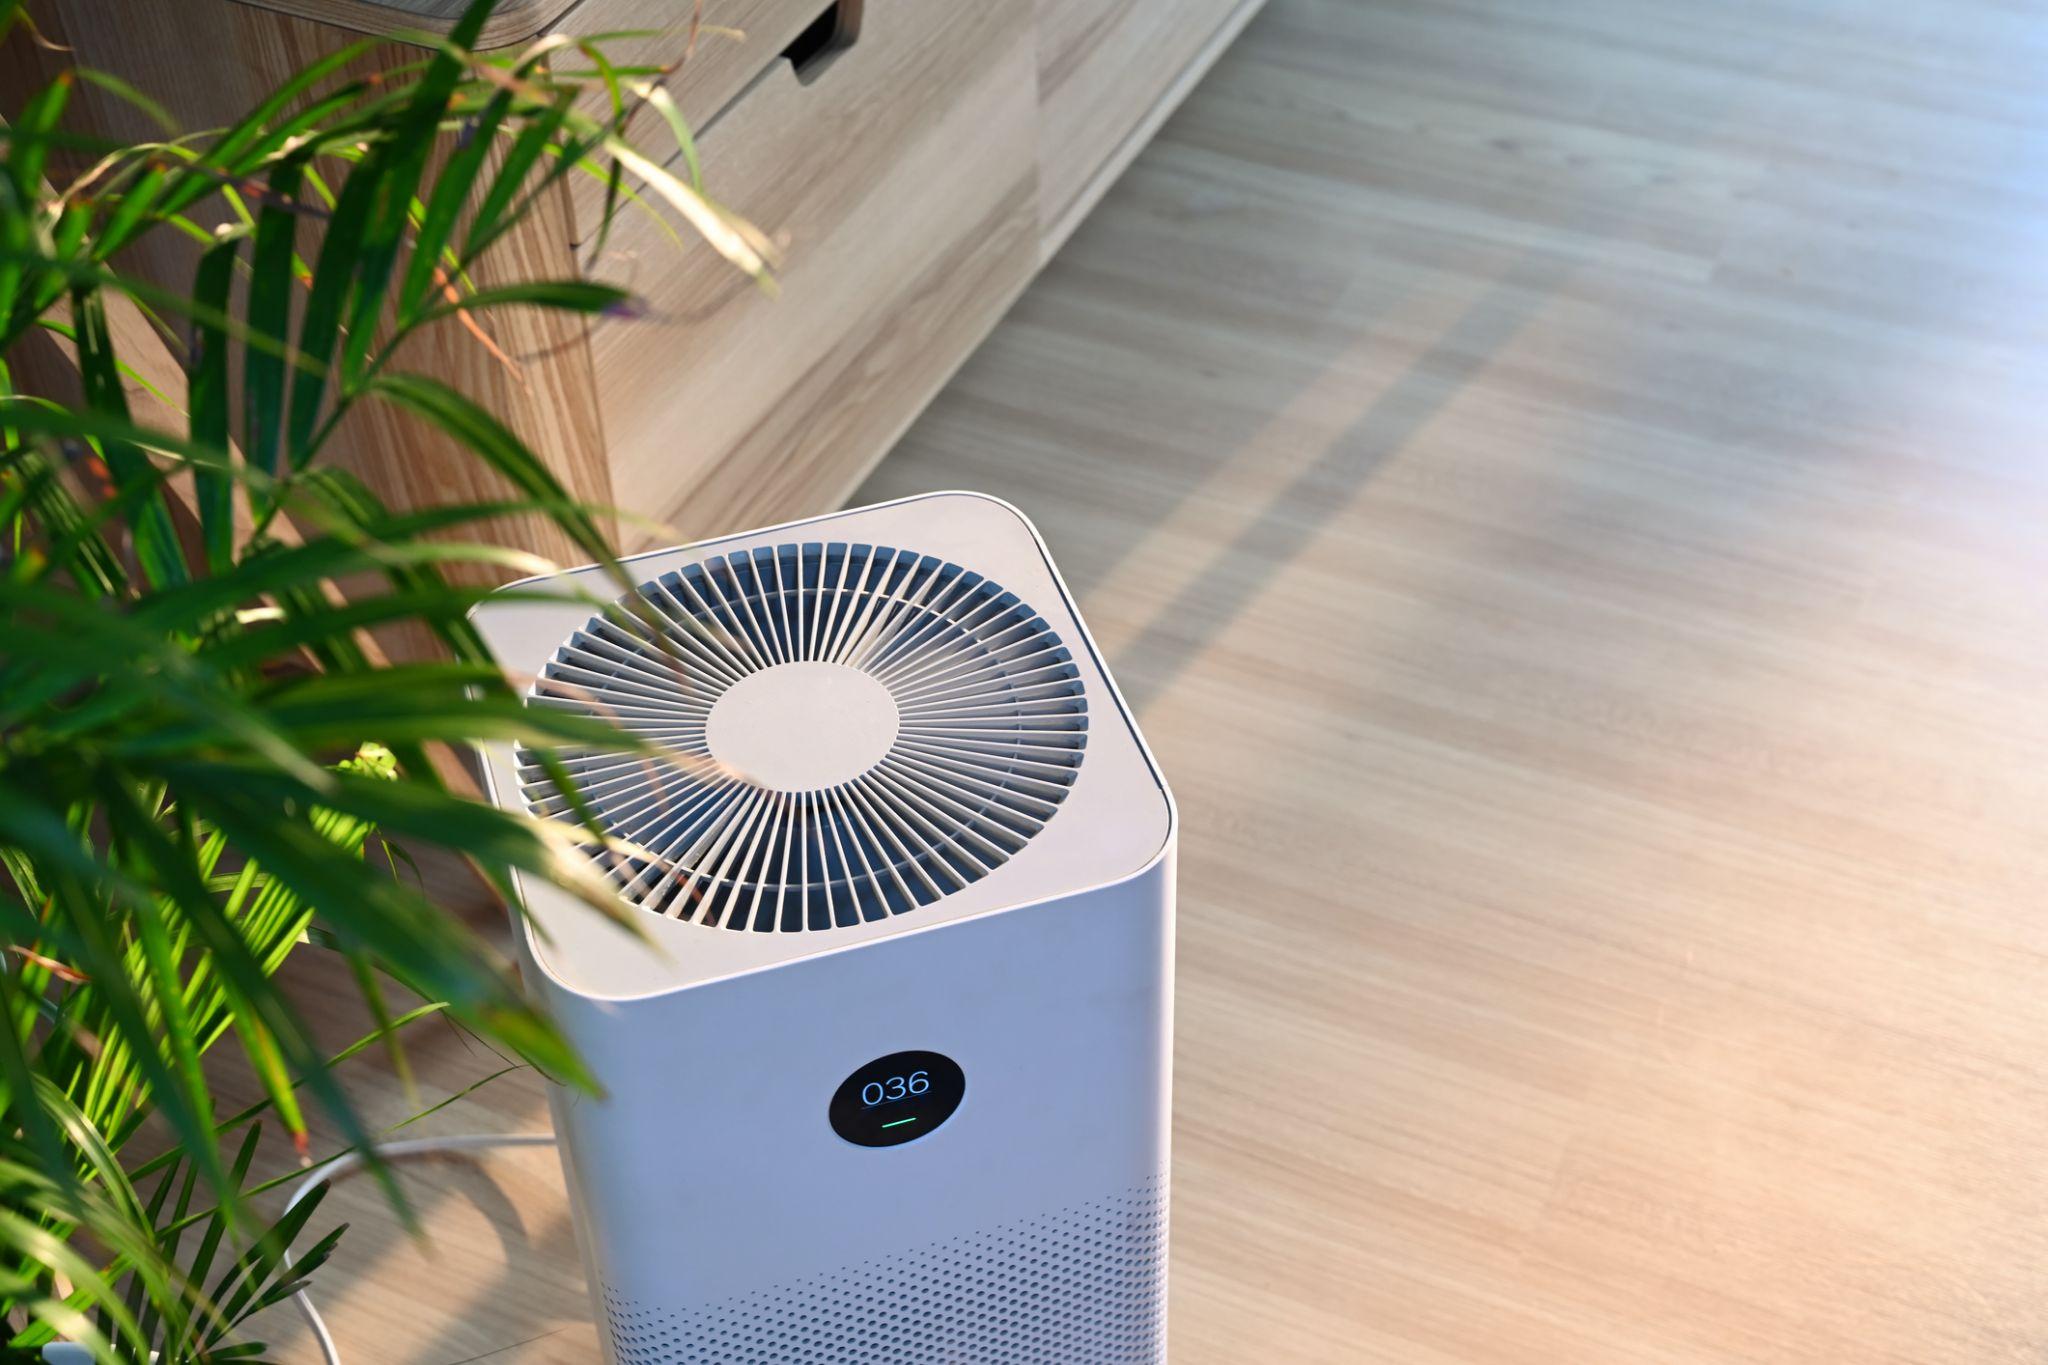 air purifier sits on wood floor next to green plant as sunshine beams light the are